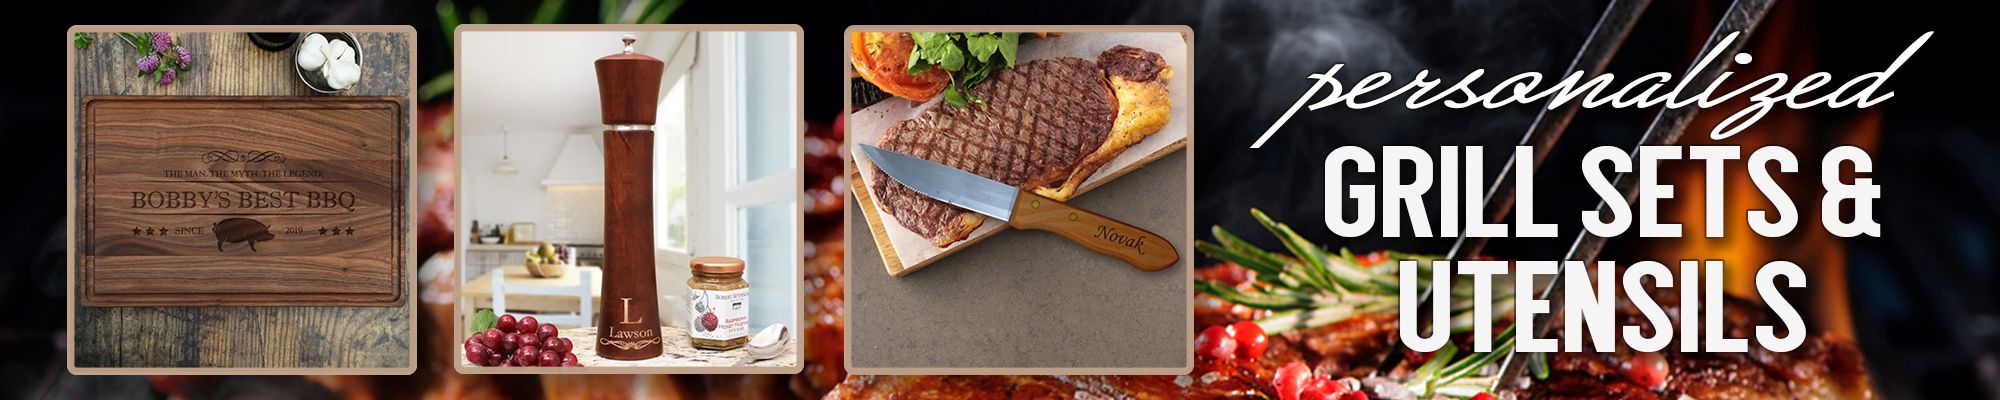 Personalized Grill Sets and Utensils